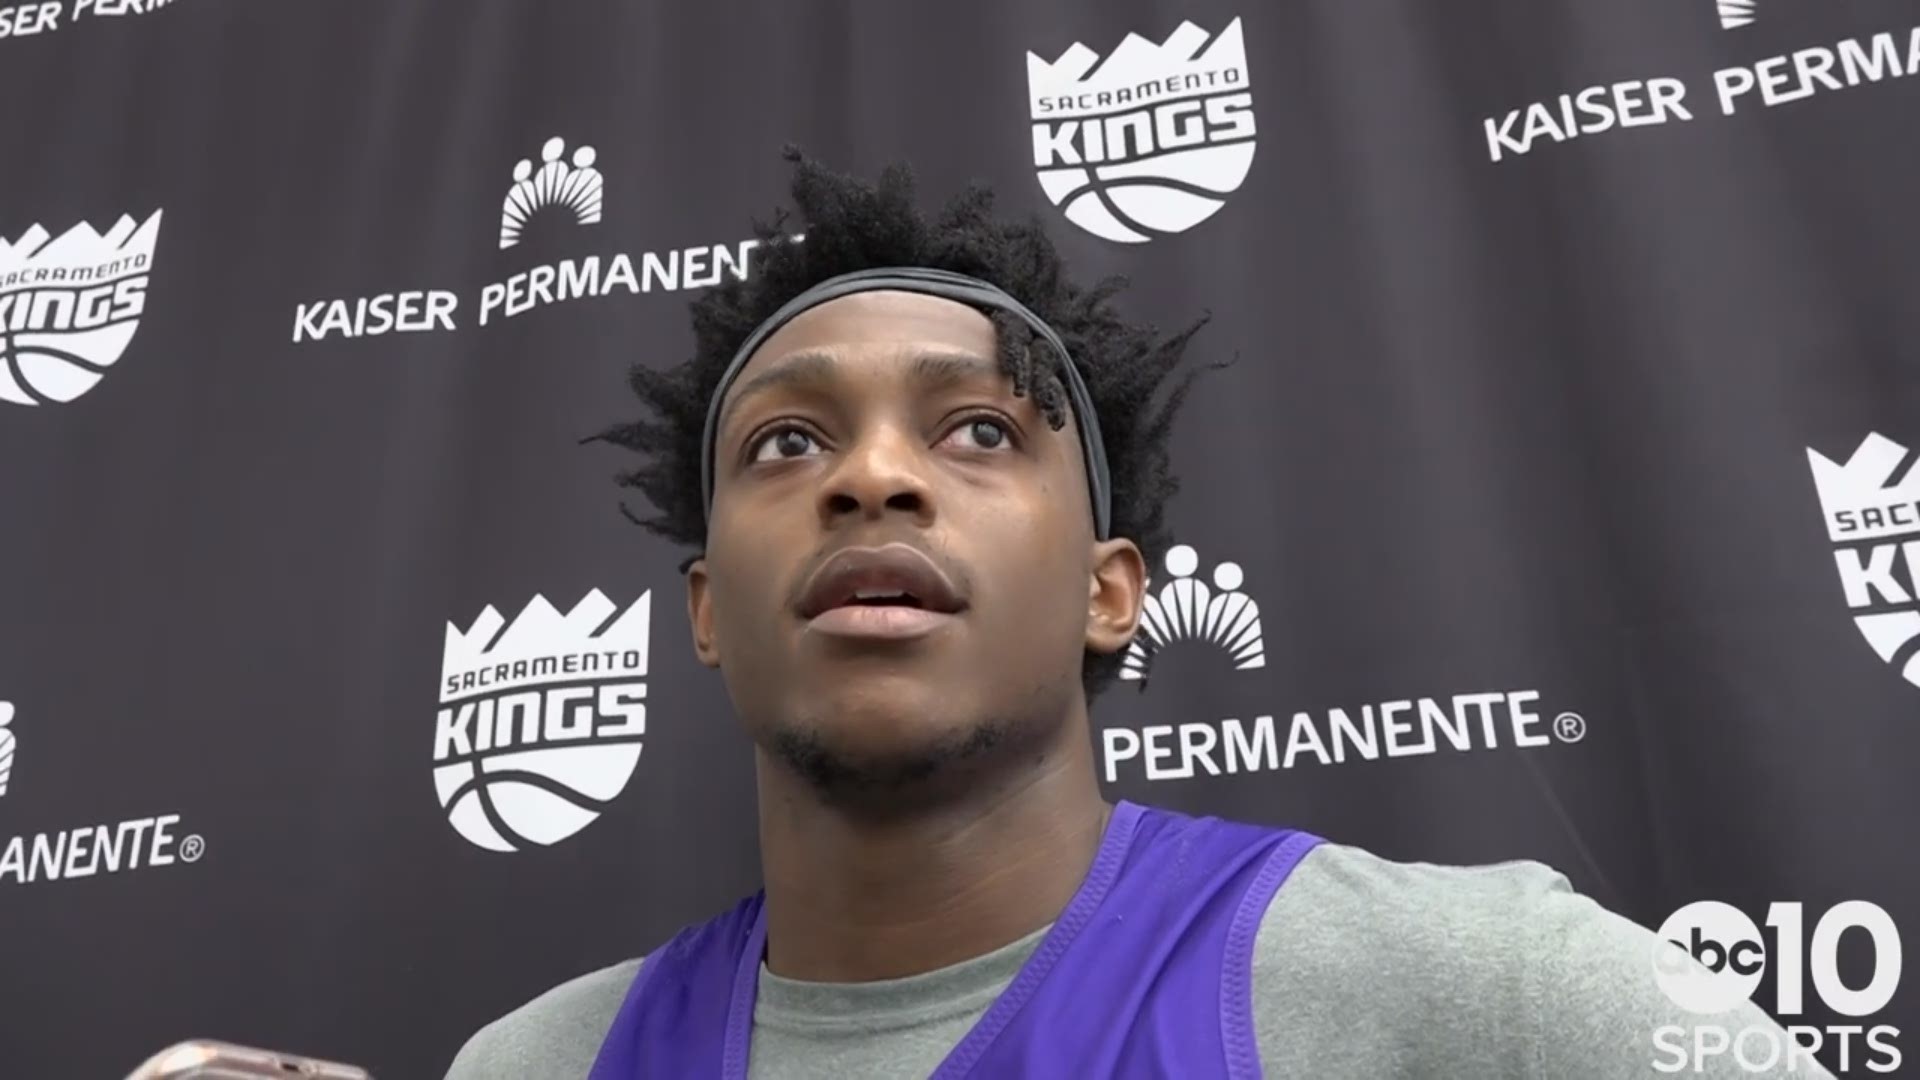 Kings PG De'Aaron Fox says defense is the team's main focus as the season approaches, preview's Monday's game vs. the Utah Jazz and their addition of Mike Conley.